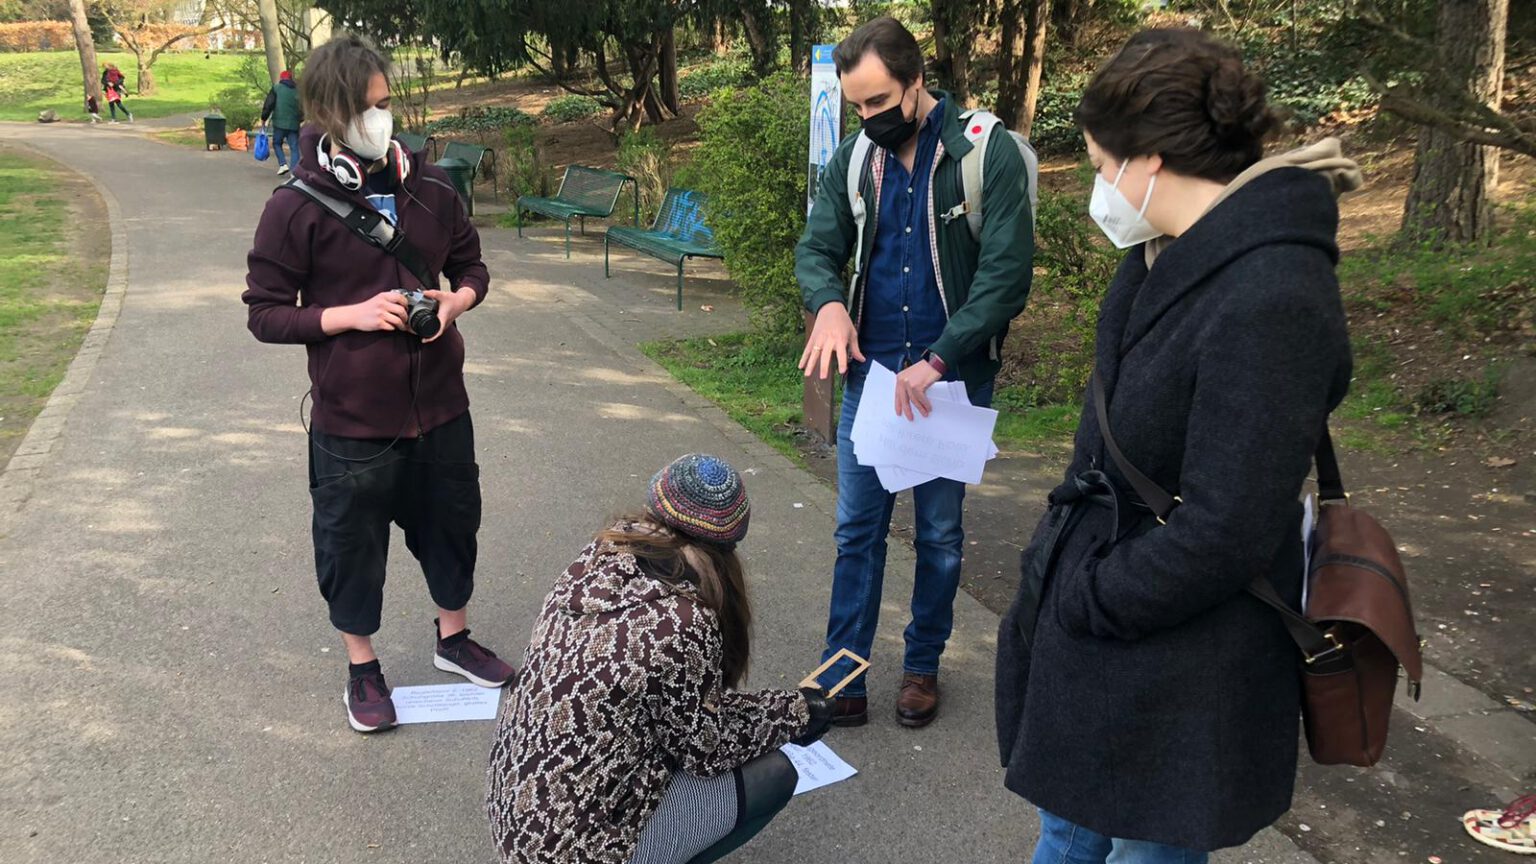 A photo of me and the other designers conducting a real-life playtest of the early concept in a park nearby